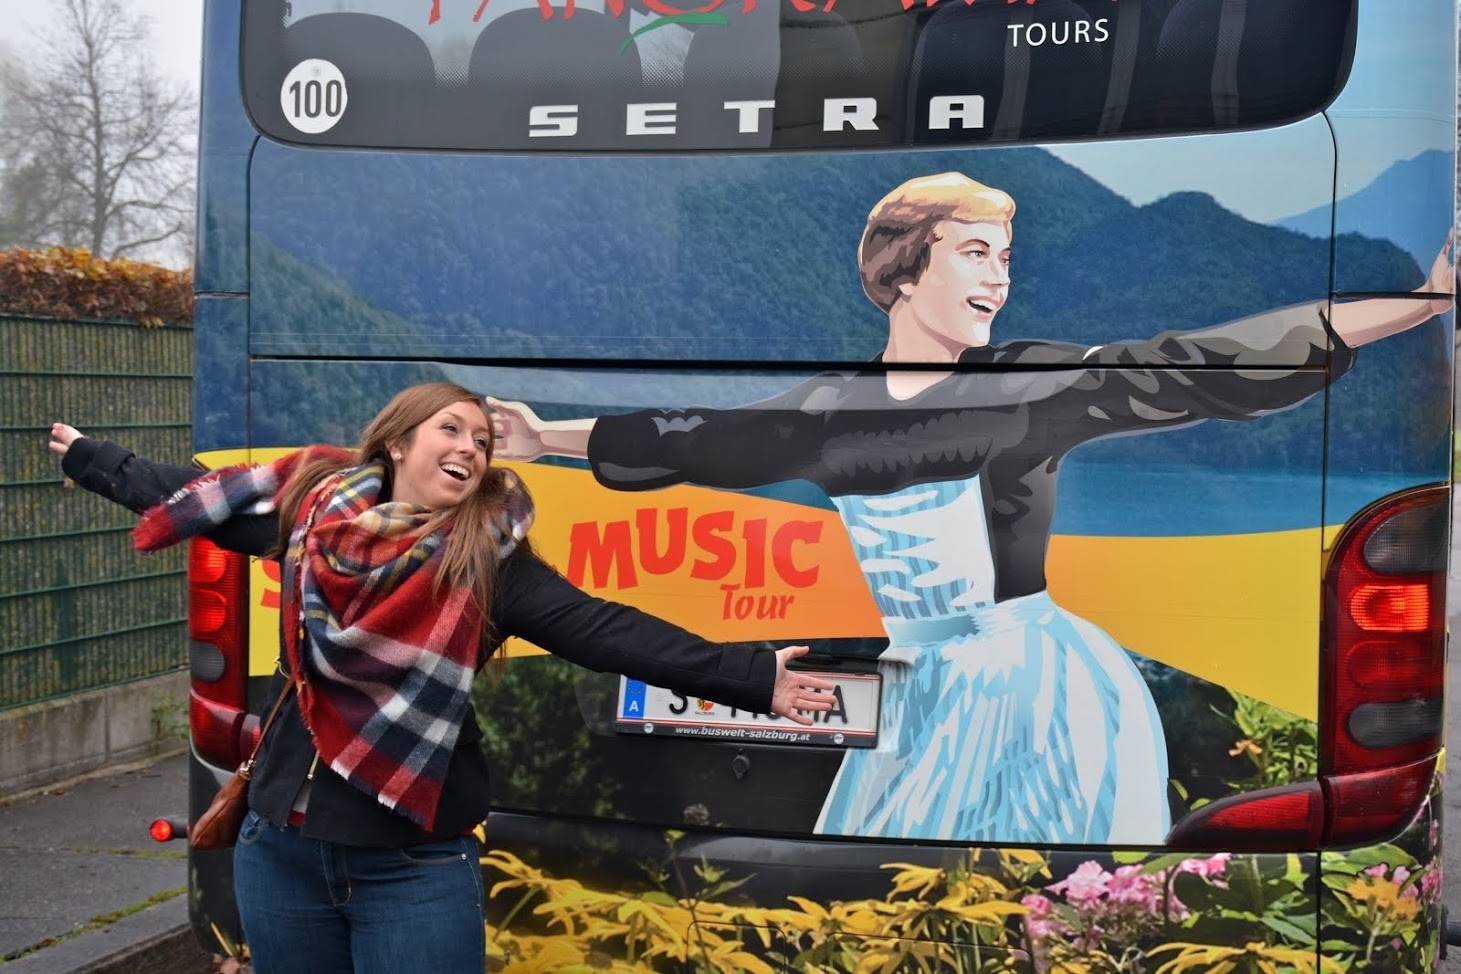 Girl in front of a Sound of Music tour bus in Salzburg